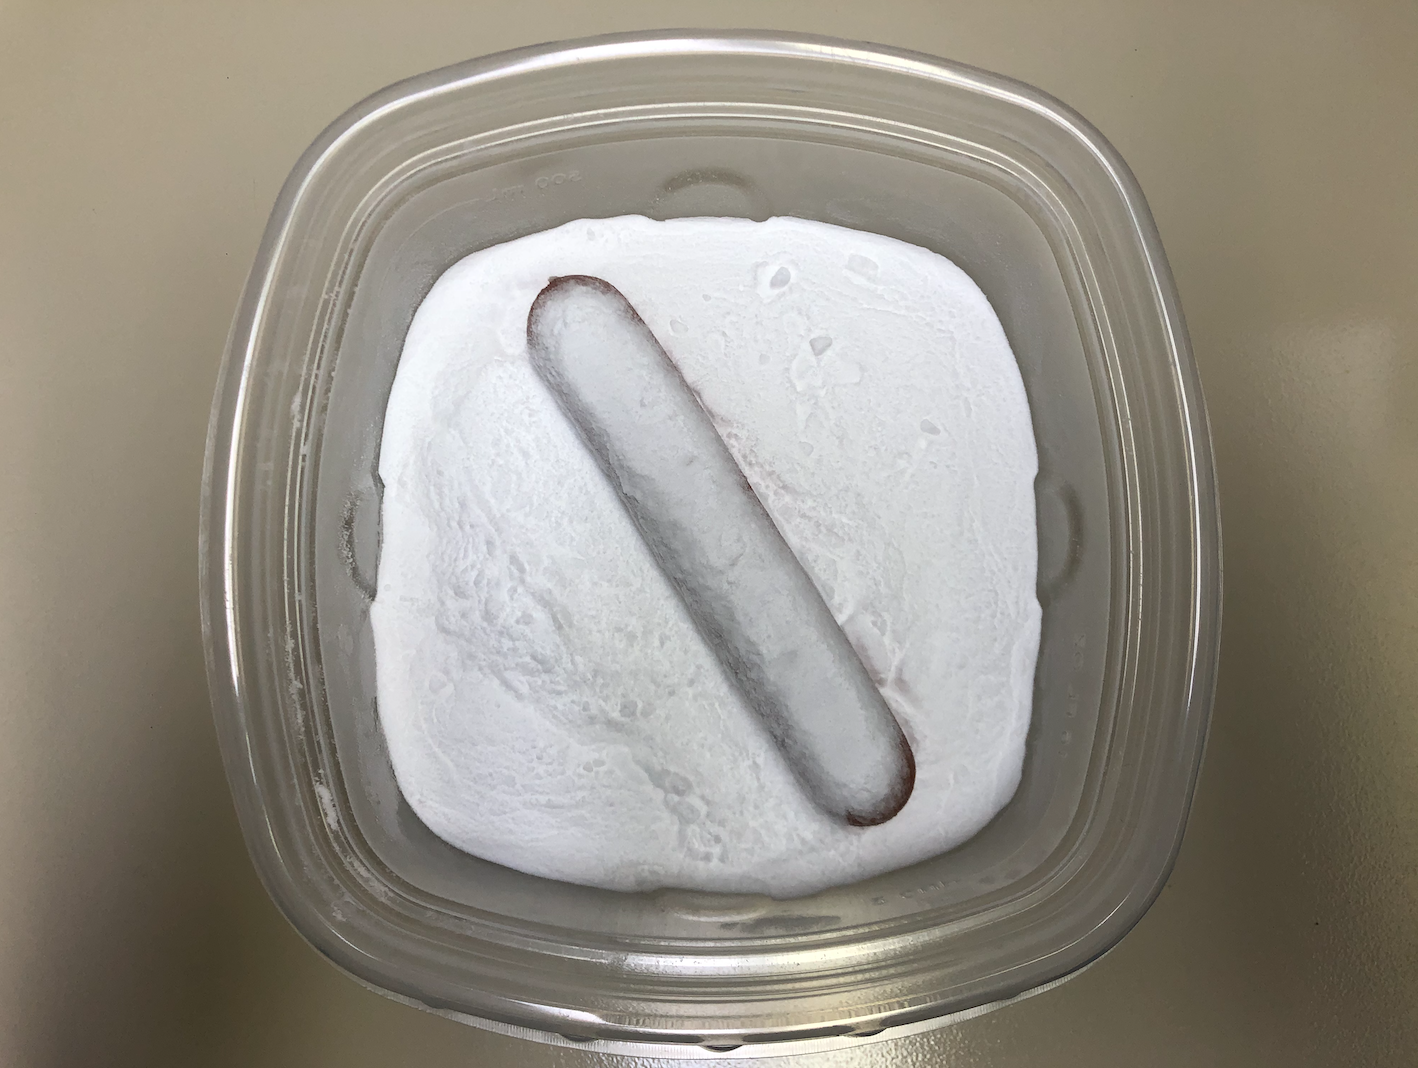 a hot dog sits in the middle of a plastic container covered in baking soda